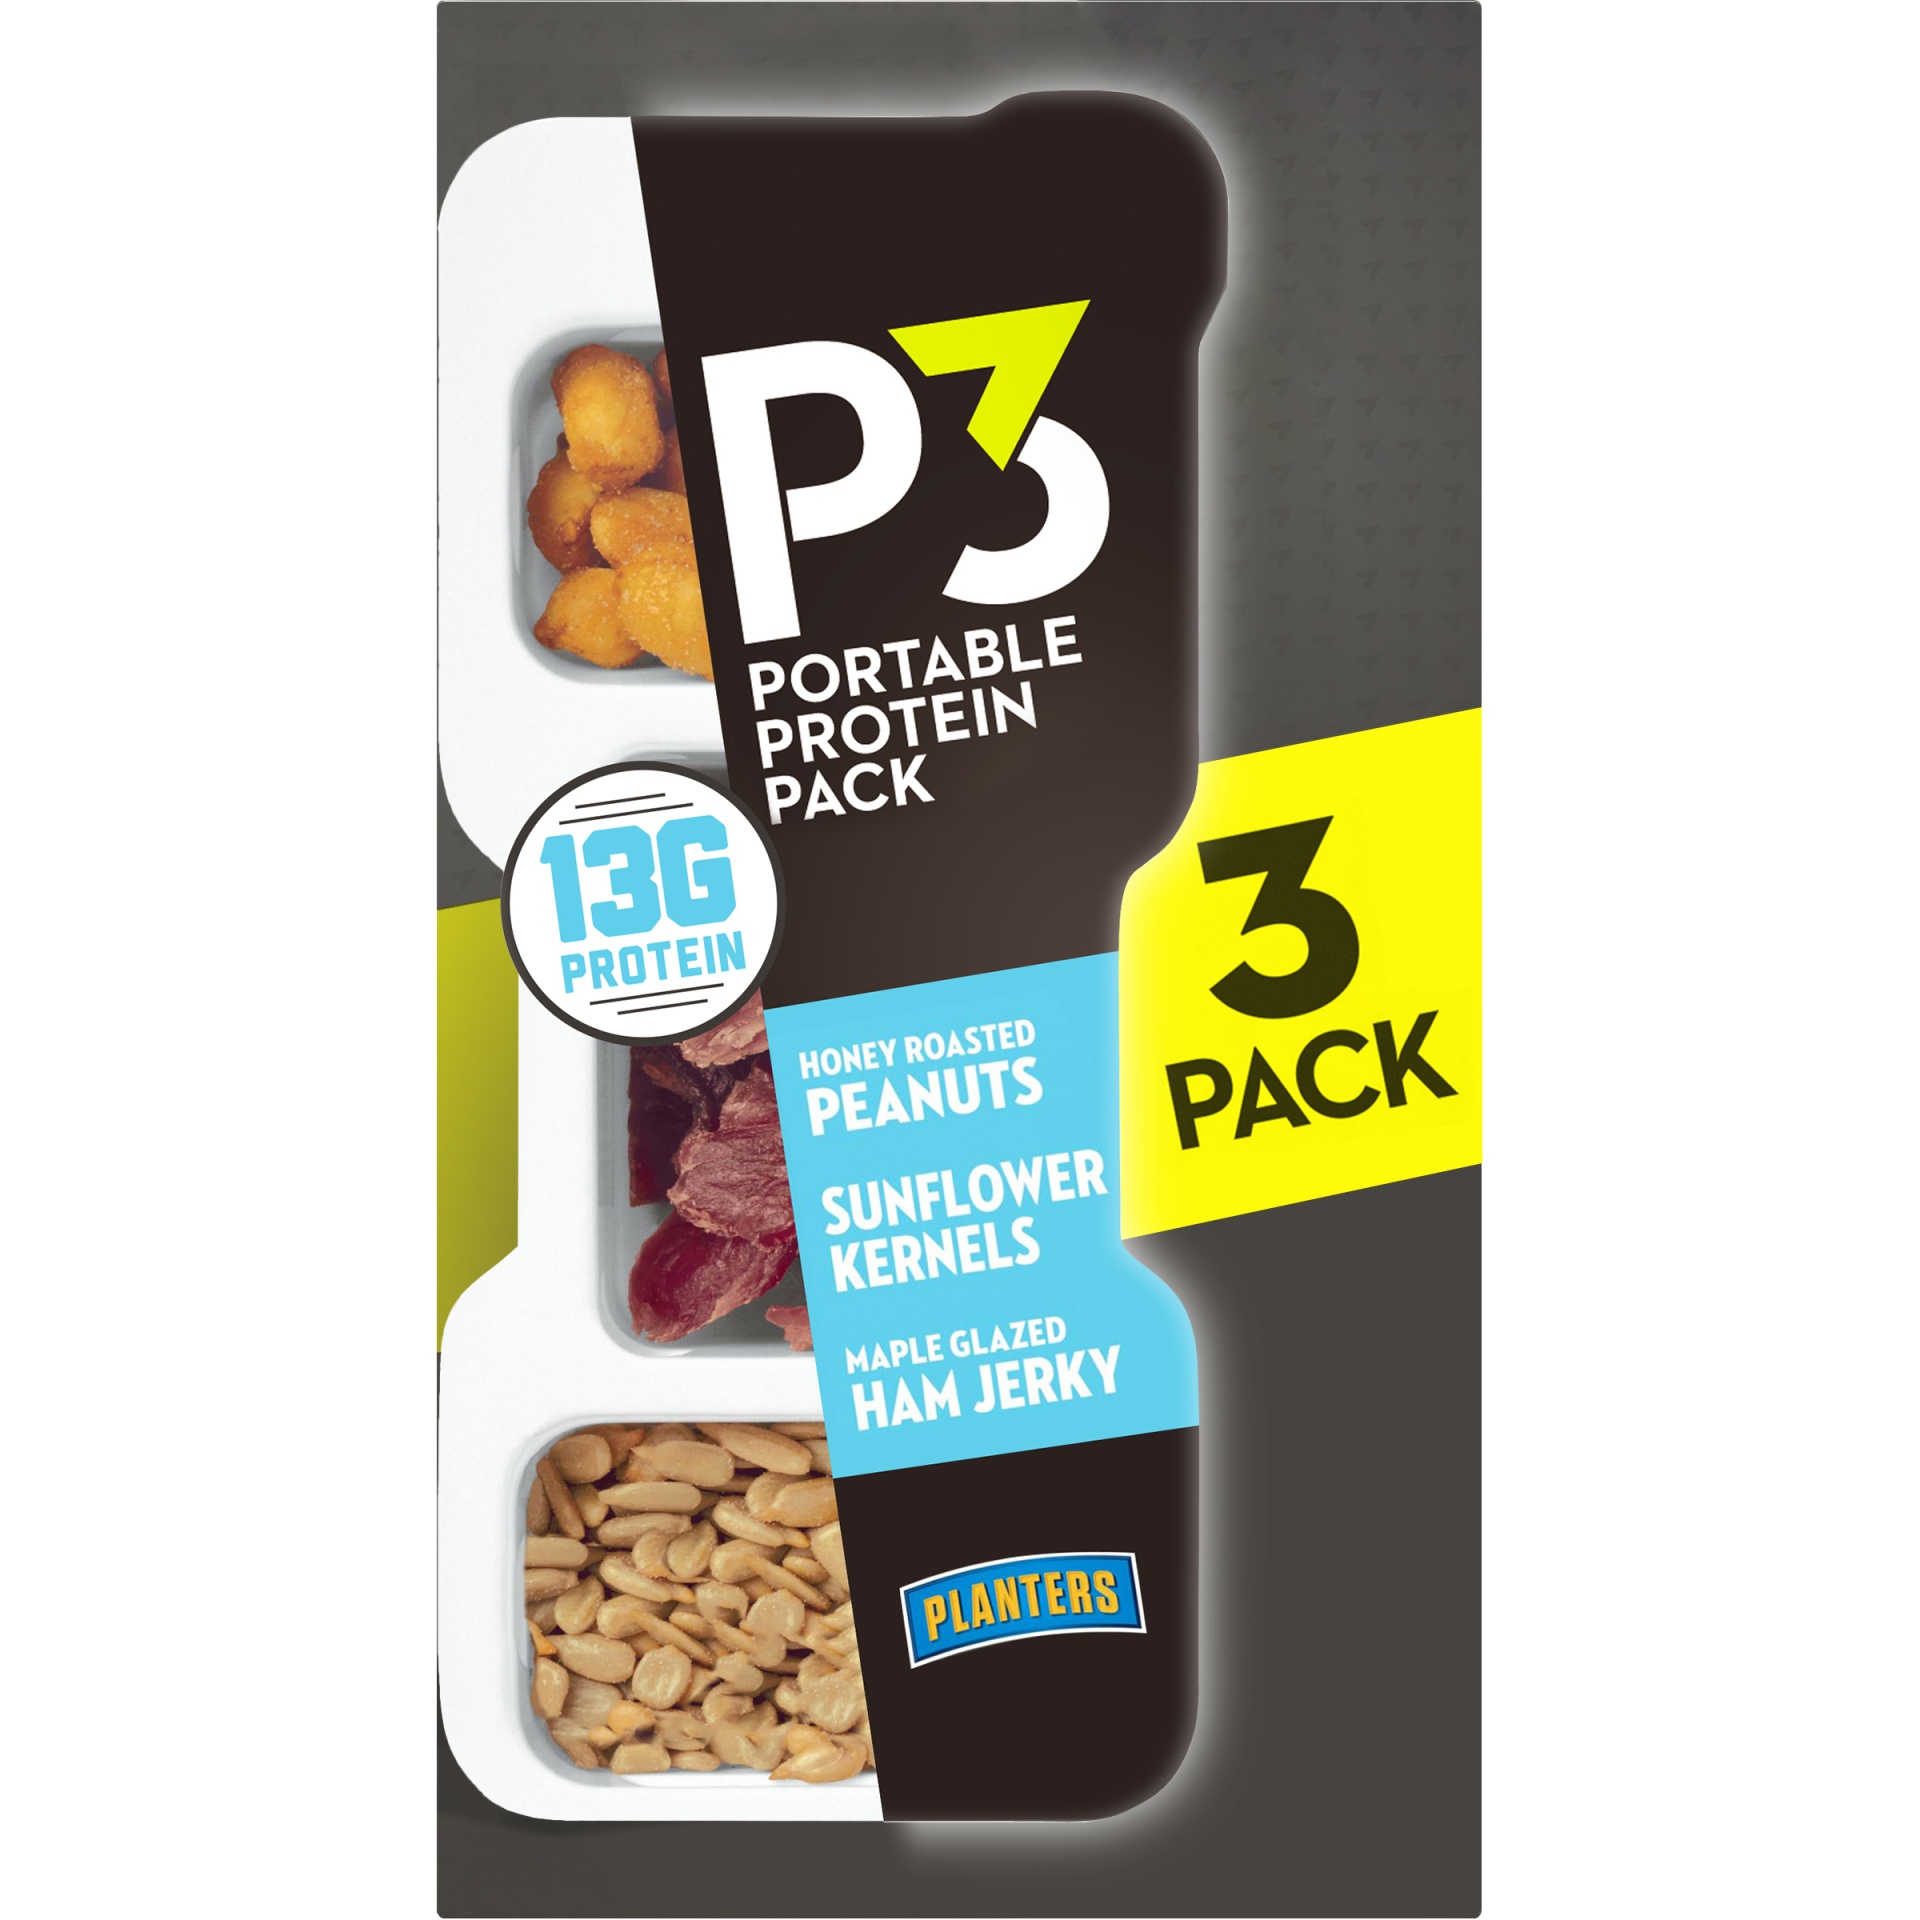 slide 1 of 7, P3 Portable Protein Snack Pack with Honey Roasted Peanuts, Sunflower Kernels & Maple Glazed Ham Jerky Trays, 5.4 oz